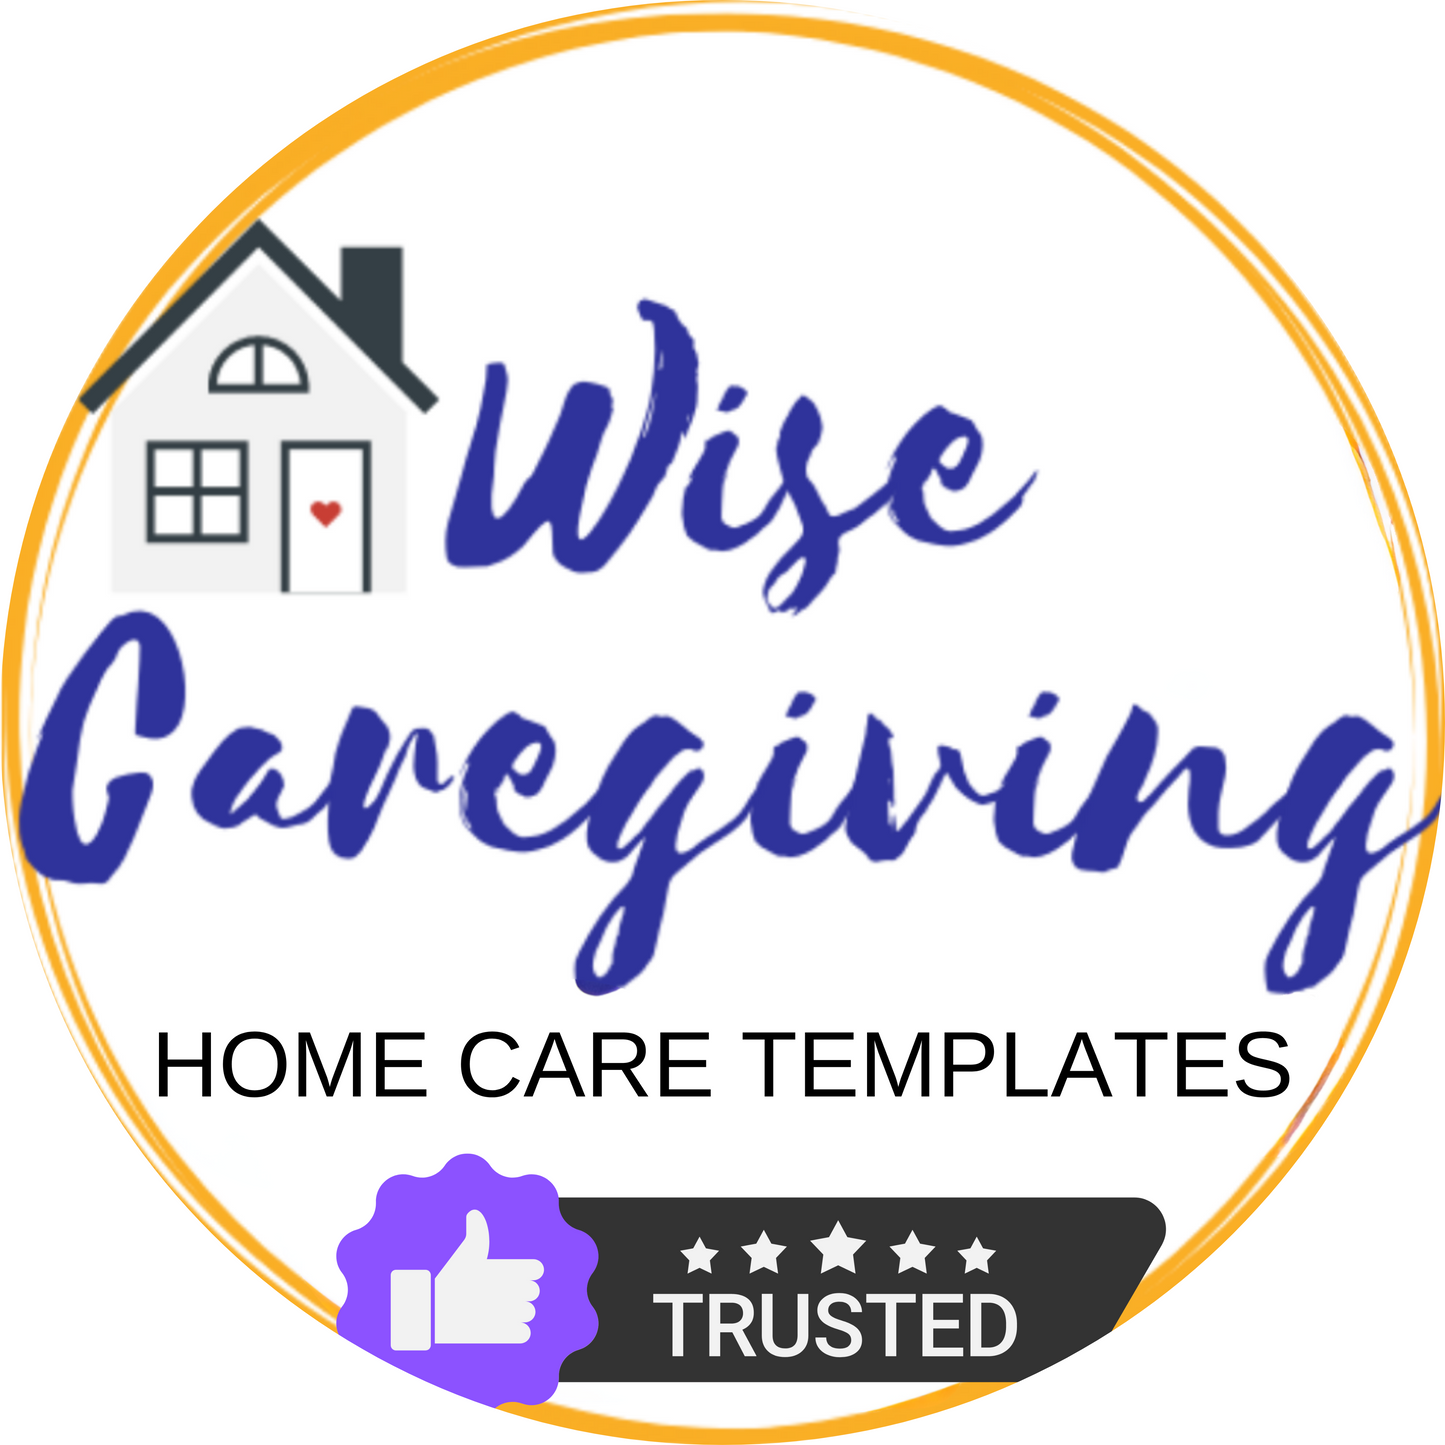 Home Care Supervisory Visit Form Template